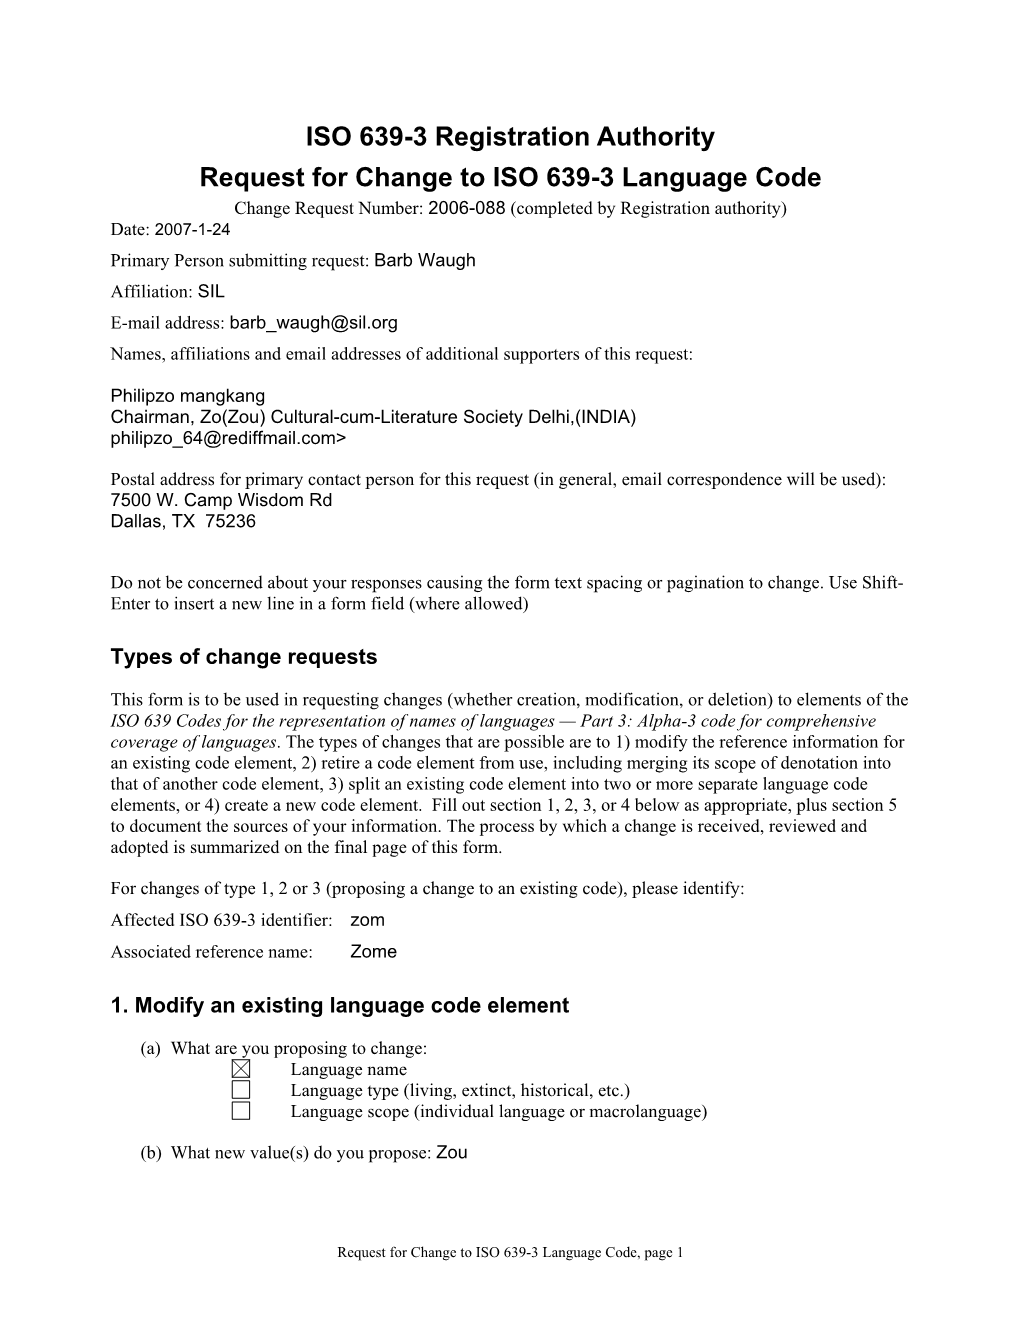 Iso639-3@Sil.Org an Email Attachment of This Completed Form Is Preferred